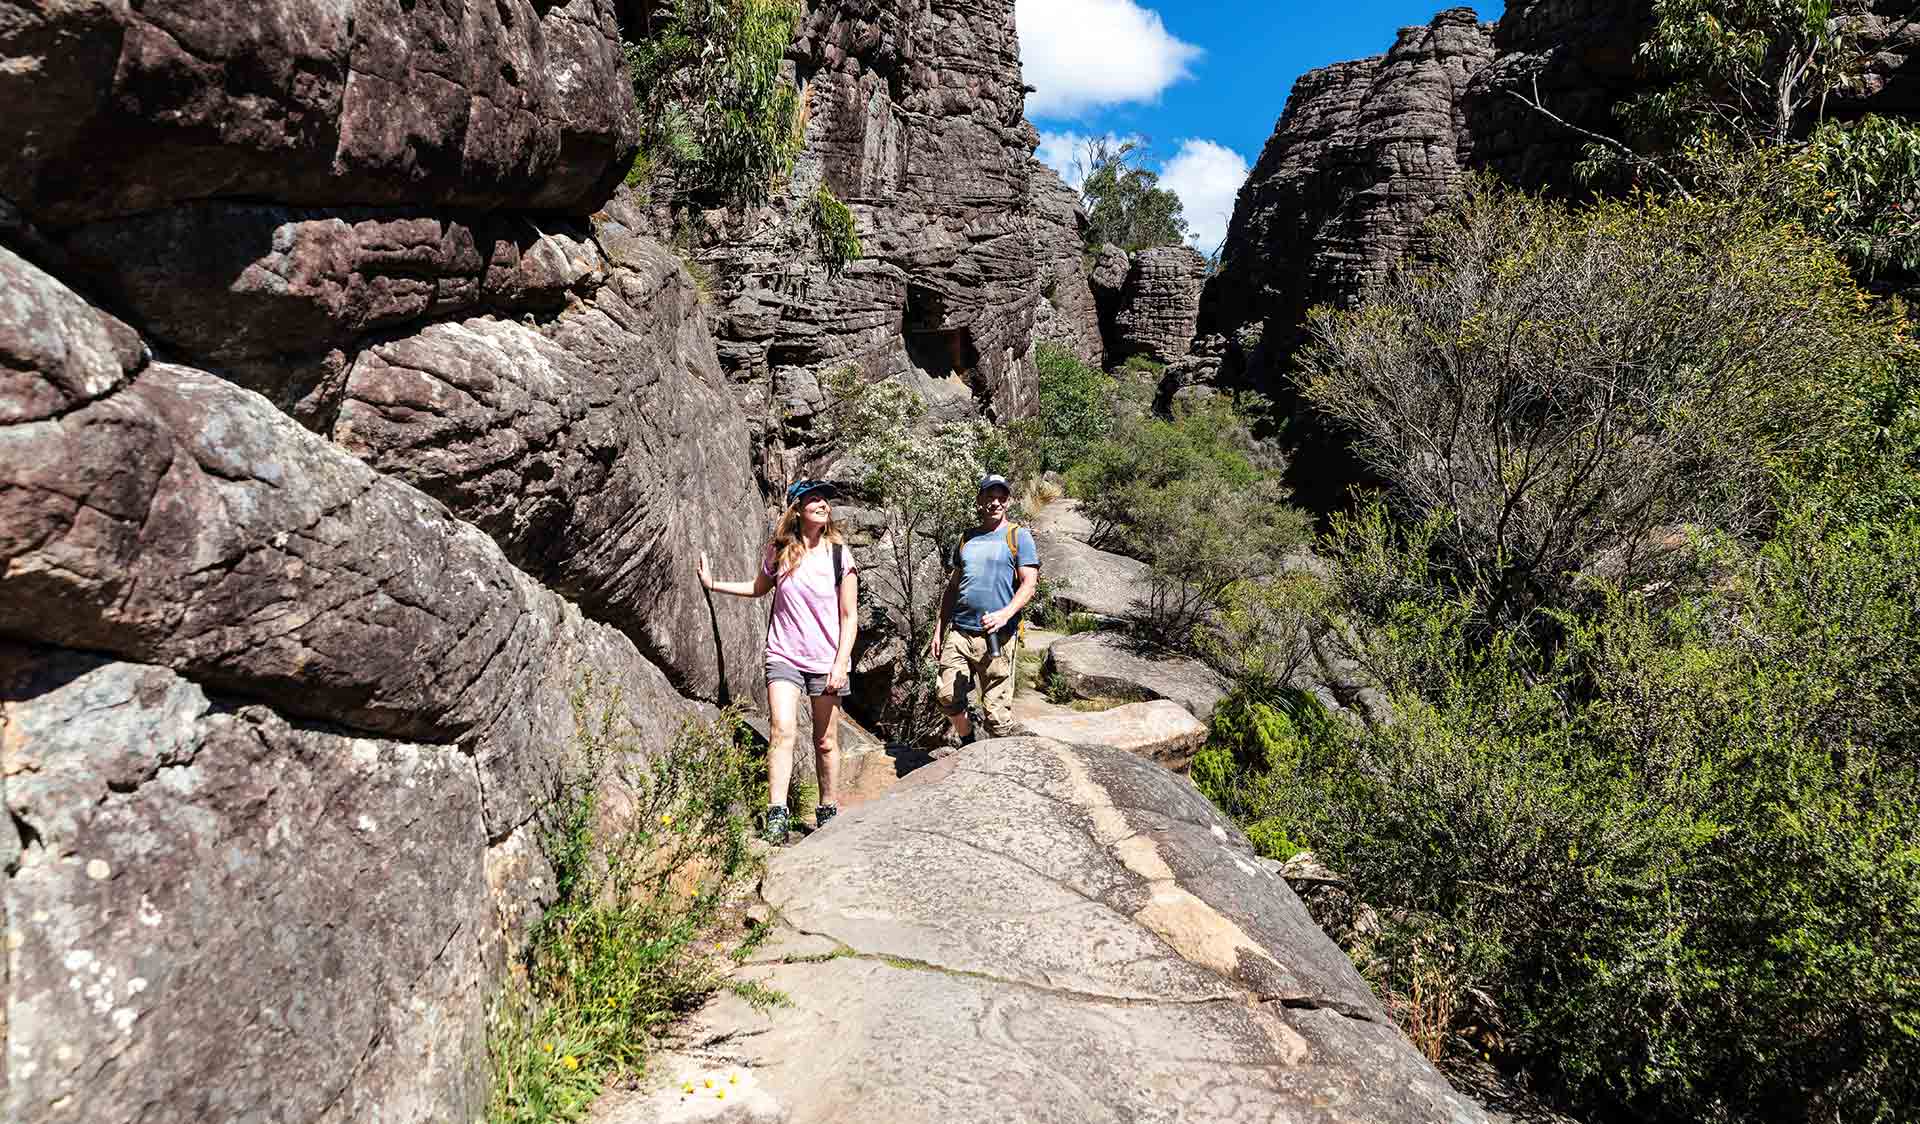 Walking through the Wonderland Range on Central Section 1 of the Grampians Peaks Trail